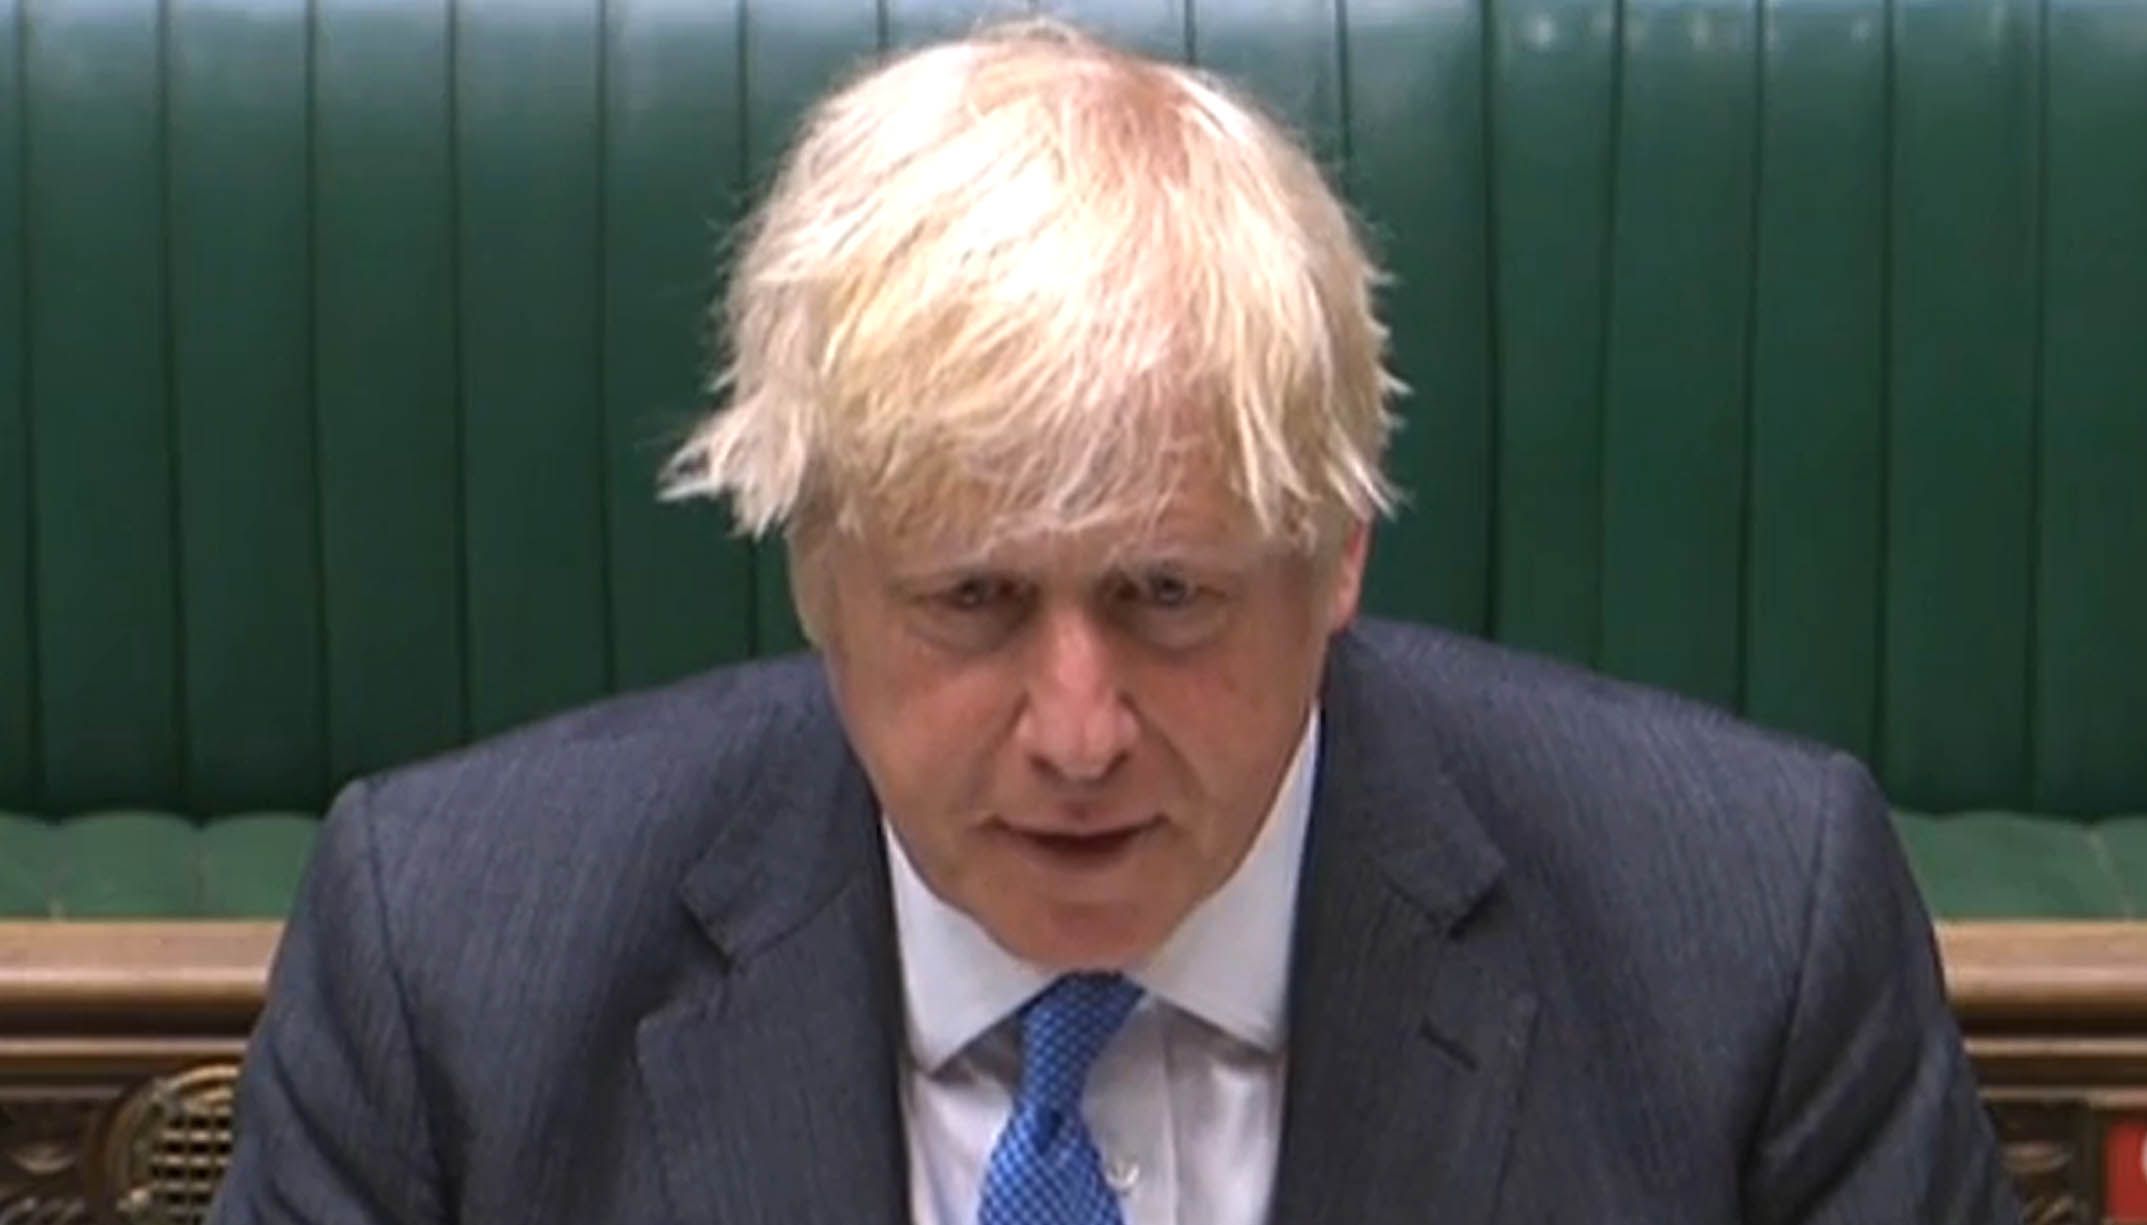 Prime Minister Boris Johnson makes a statement on the G7 summit in the House of Commons.